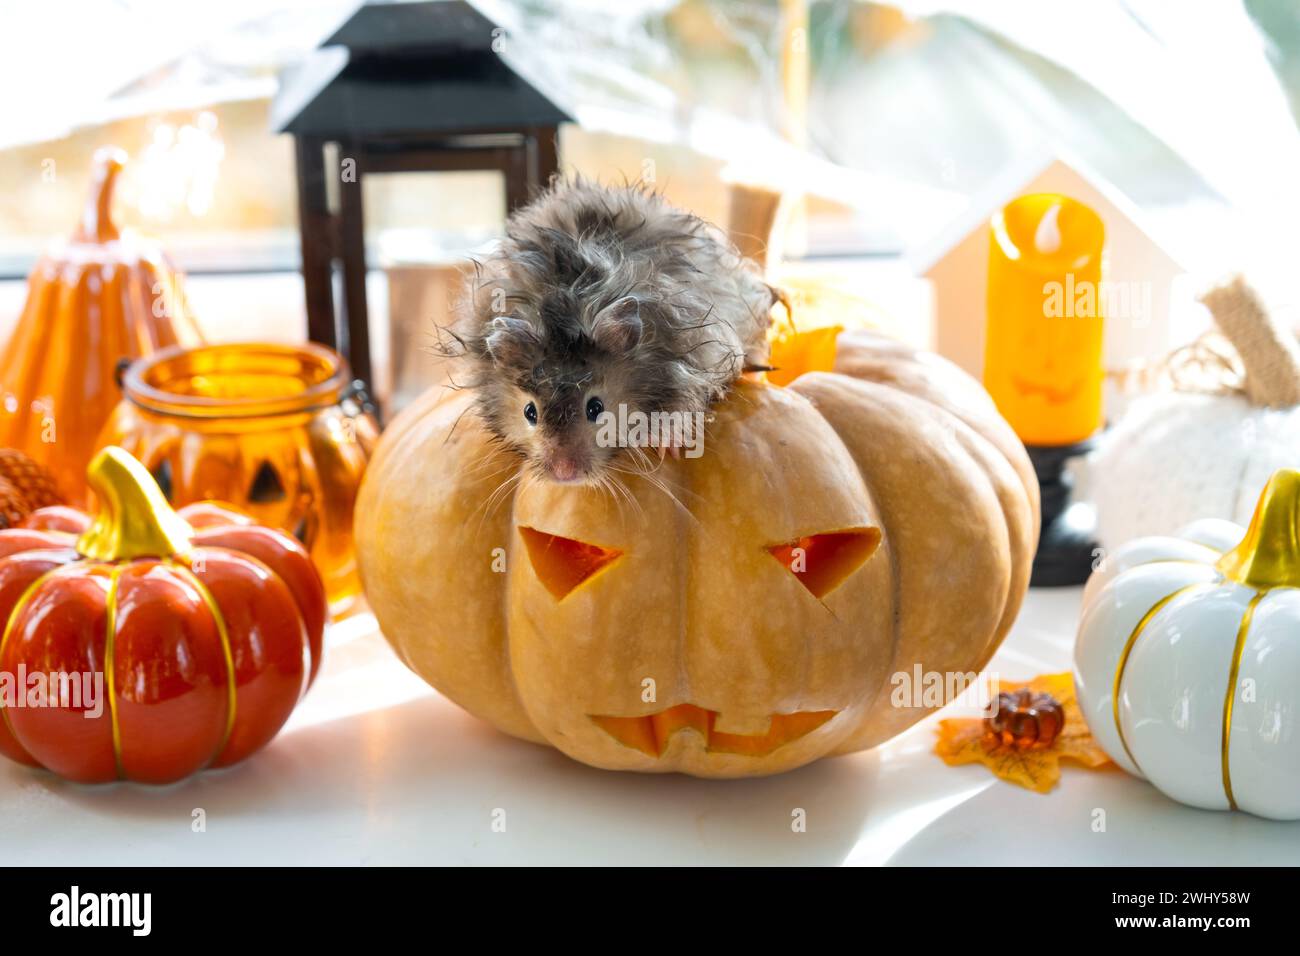 Funny shaggy fluffy hamster sits inside a pumpkin in the cut-out round hole and chews pumpkin in a Halloween decor among garland Stock Photo